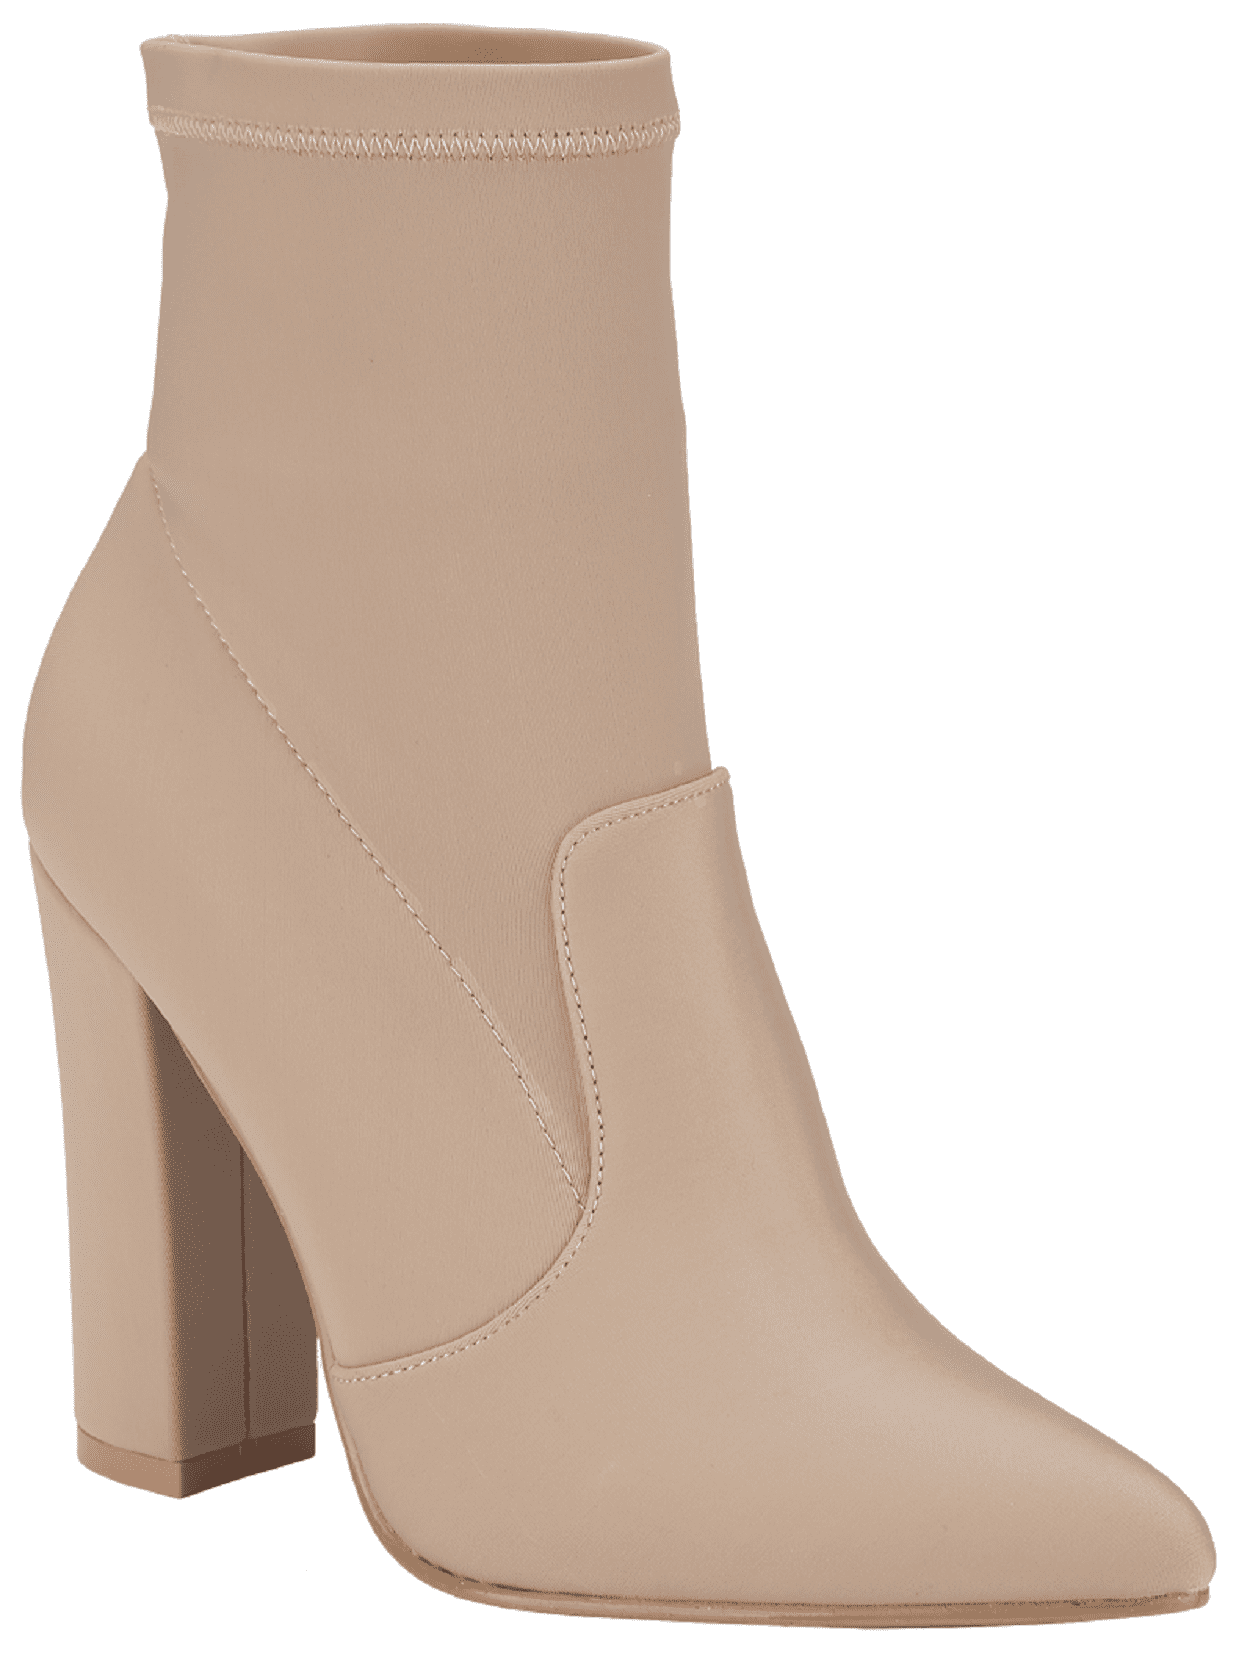 Womens Slip On Pointed Toe Mid Calf Boots Elastic Stretchy Suede Chunky Heel Pull On Booties